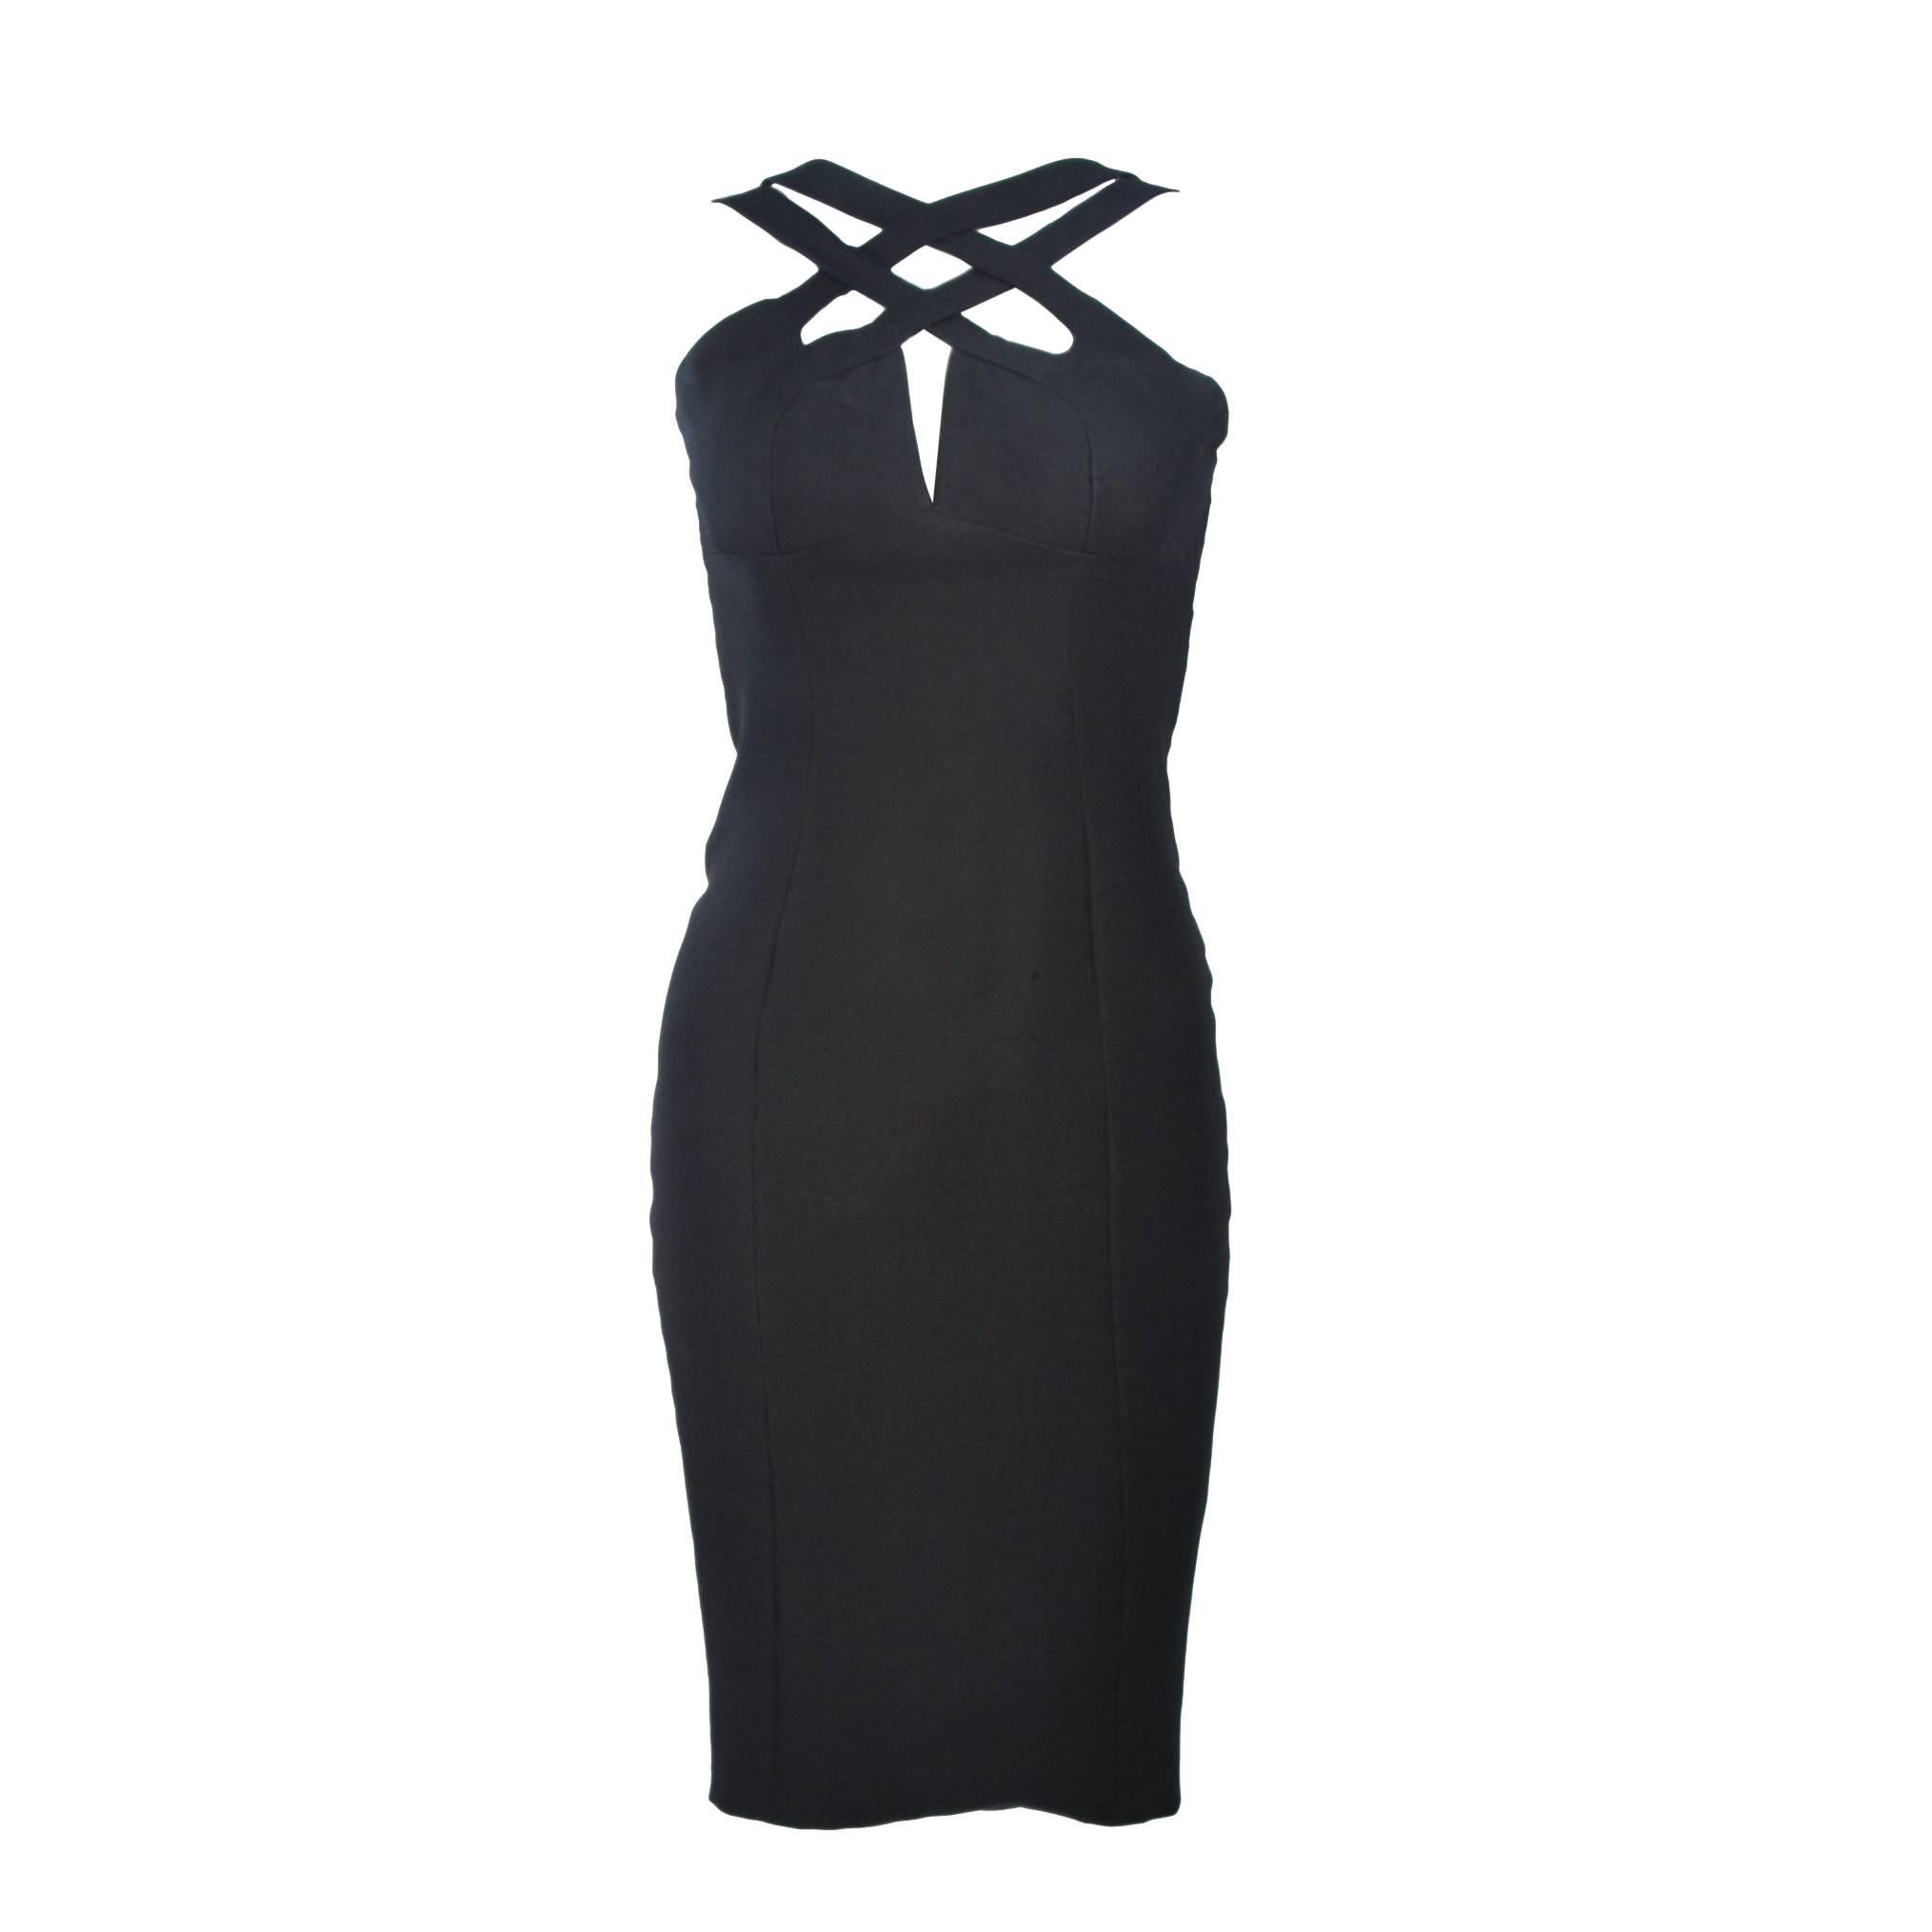 ELIZABETH MASON COUTURE Silk Criss Cross Cocktail Dress Made to Measure For Sale